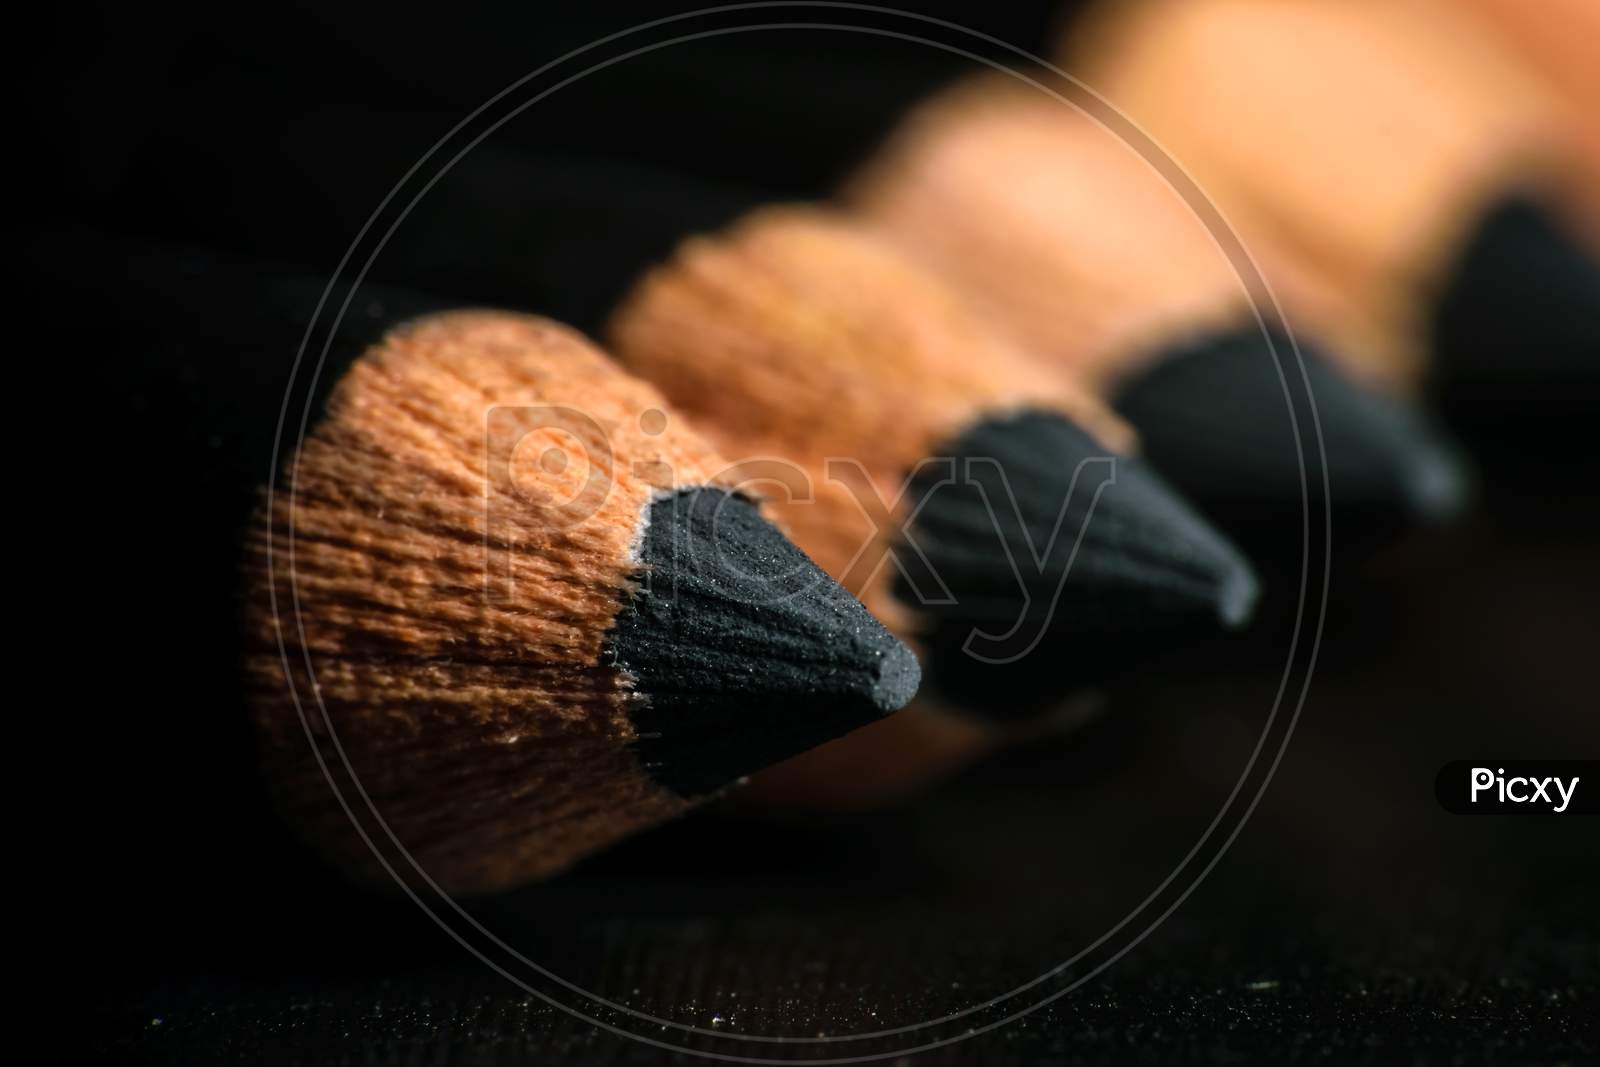 A Group Of Pencils Are Kept On A Dark Paper In Ascending Order. Selective Focus On The Tip Of The Proximal Pencil